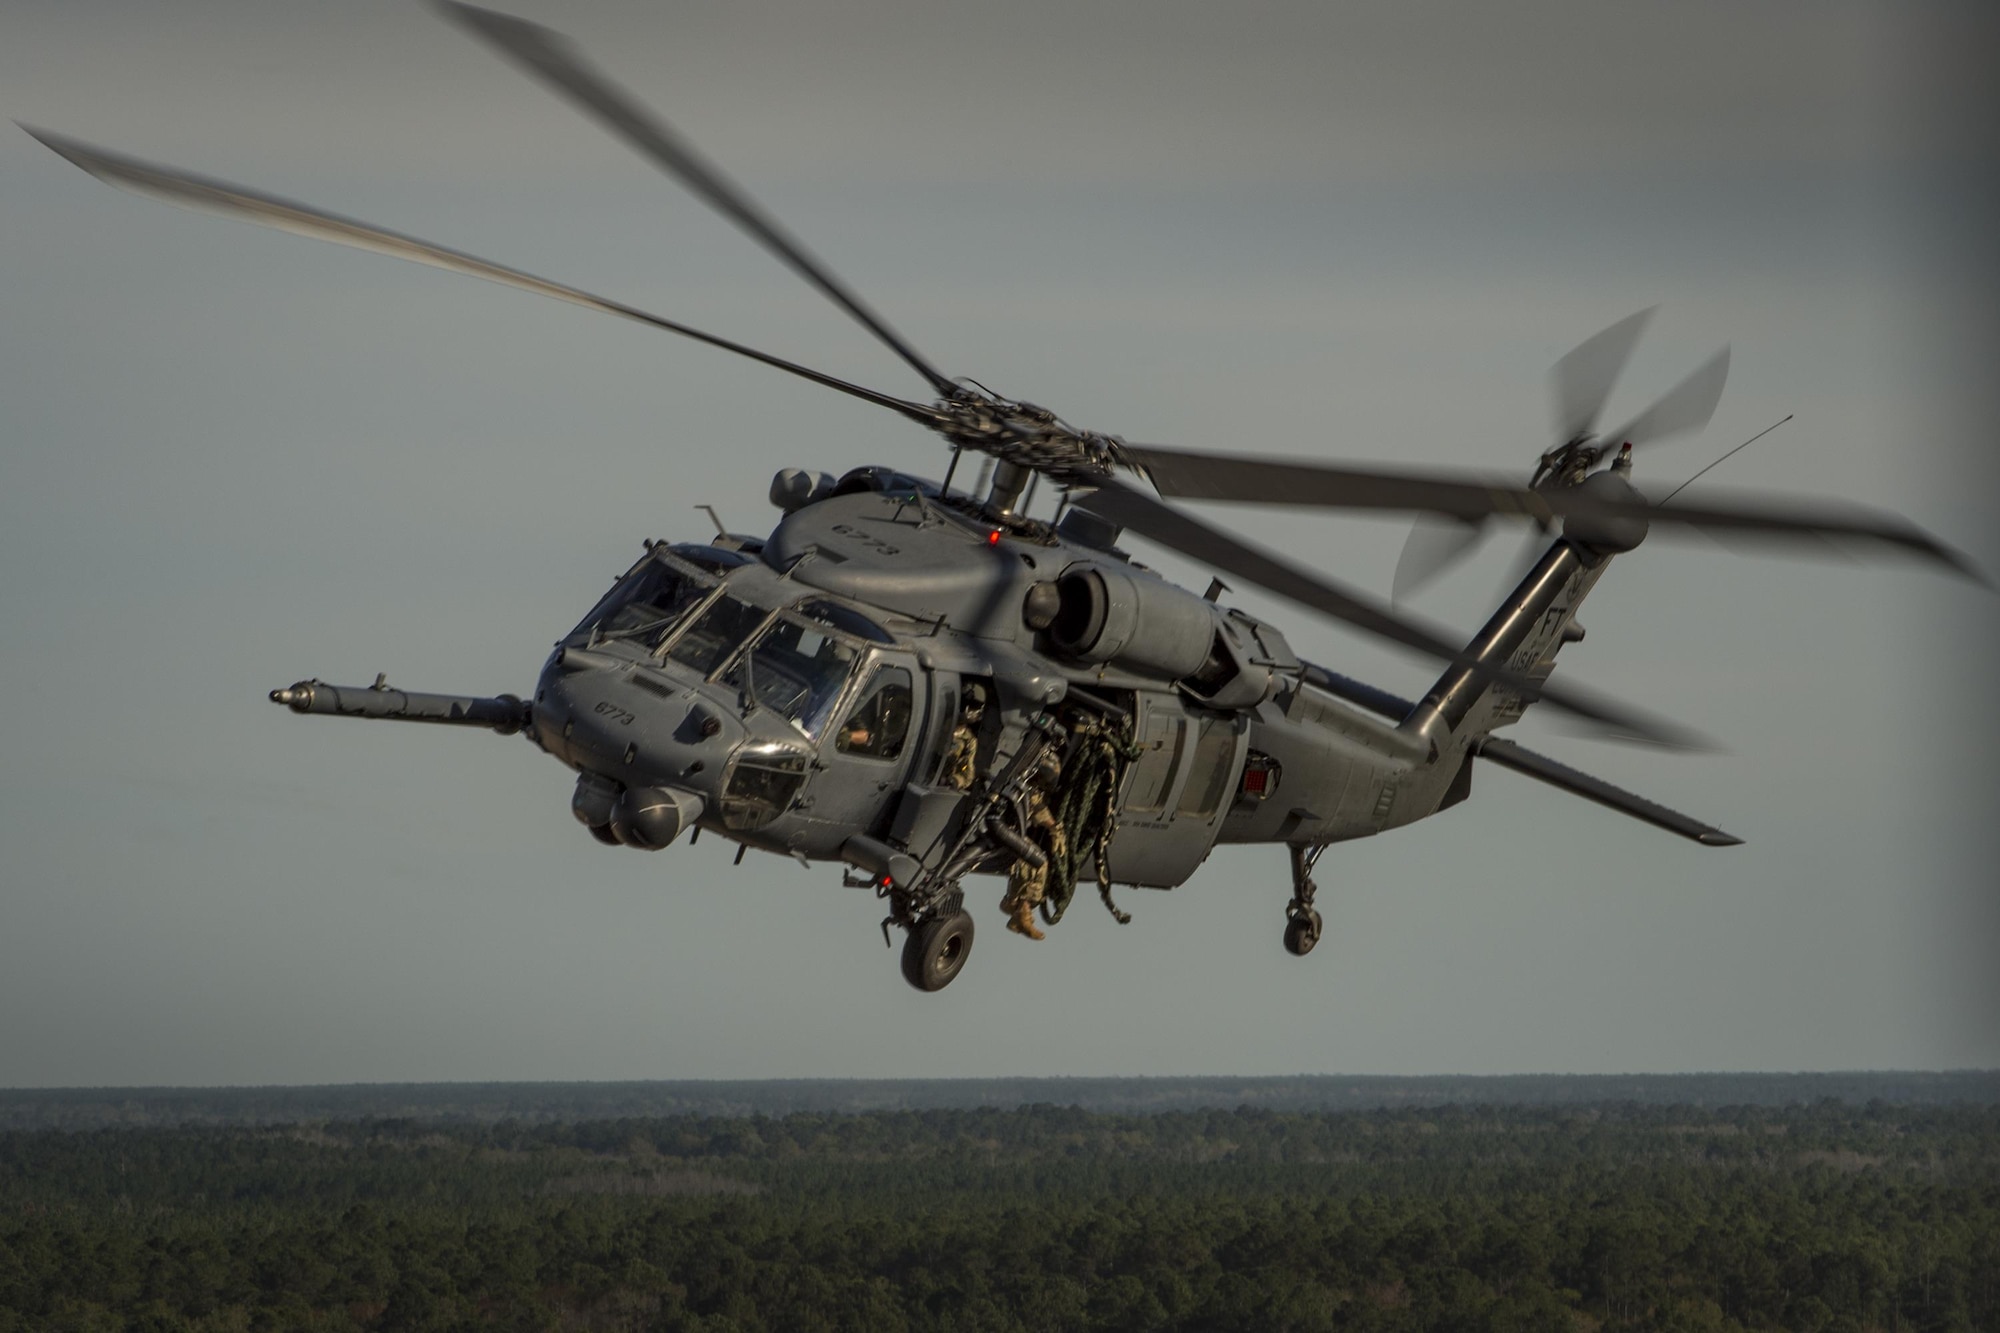 An HH-60G Pave Hawk from the 41st Rescue Squadron, flies as part of a combat search and rescue demonstration during the 75th Anniversary Flying Tiger Reunion, March 10, 2017, at Moody Air Force Base, Ga. In 1941, President Roosevelt signed an executive order forming the American Volunteer Group. The AVG was organized into the 1st, 2nd, and 3rd Pursuit Squadrons and later disbanded and replaced by the 23d Fighter Group in 1942. Under the command of Gen. Claire Chennault, the Flying Tigers comprised of the 74th, 75th, and 76th Pursuit Squadrons defended China against the Japanese. Throughout World War II, the Flying Tigers achieved combat success and flew the US-made Curtiss P-40 Warhawks painted with the shark-mouth design. (U.S. Air Force photo by Tech. Sgt. Zachary Wolf)